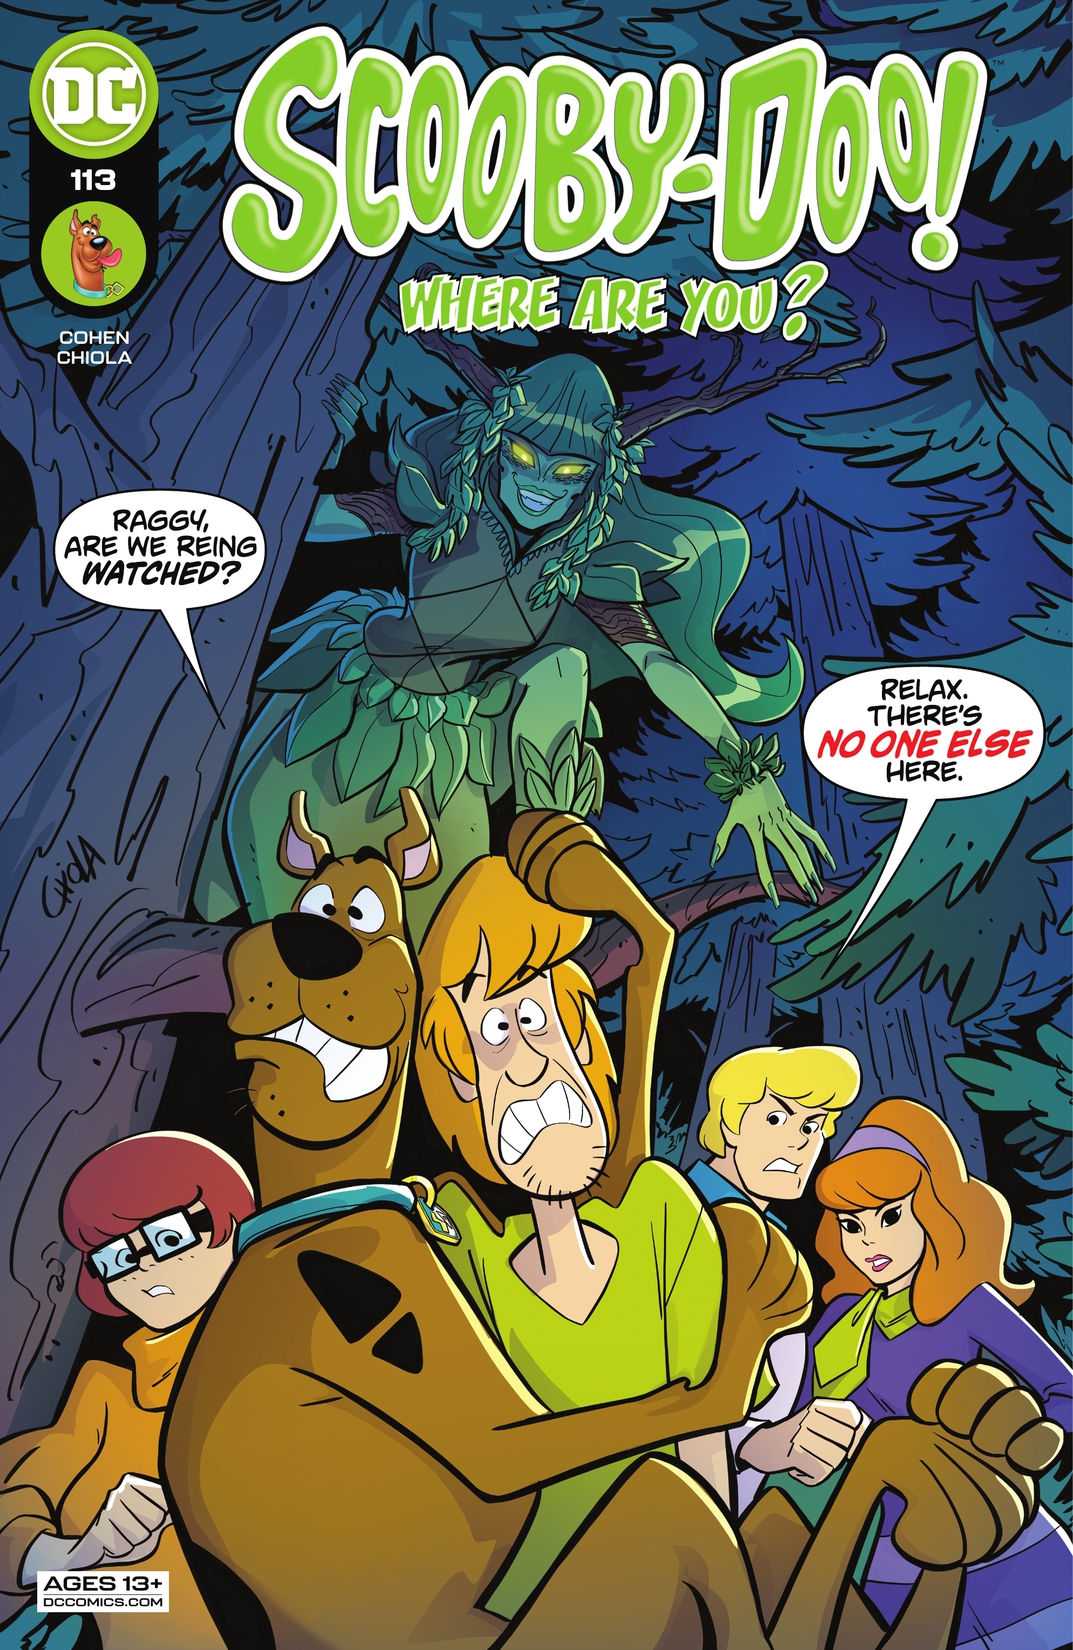 Scooby-Doo, Where Are You? #113 preview images